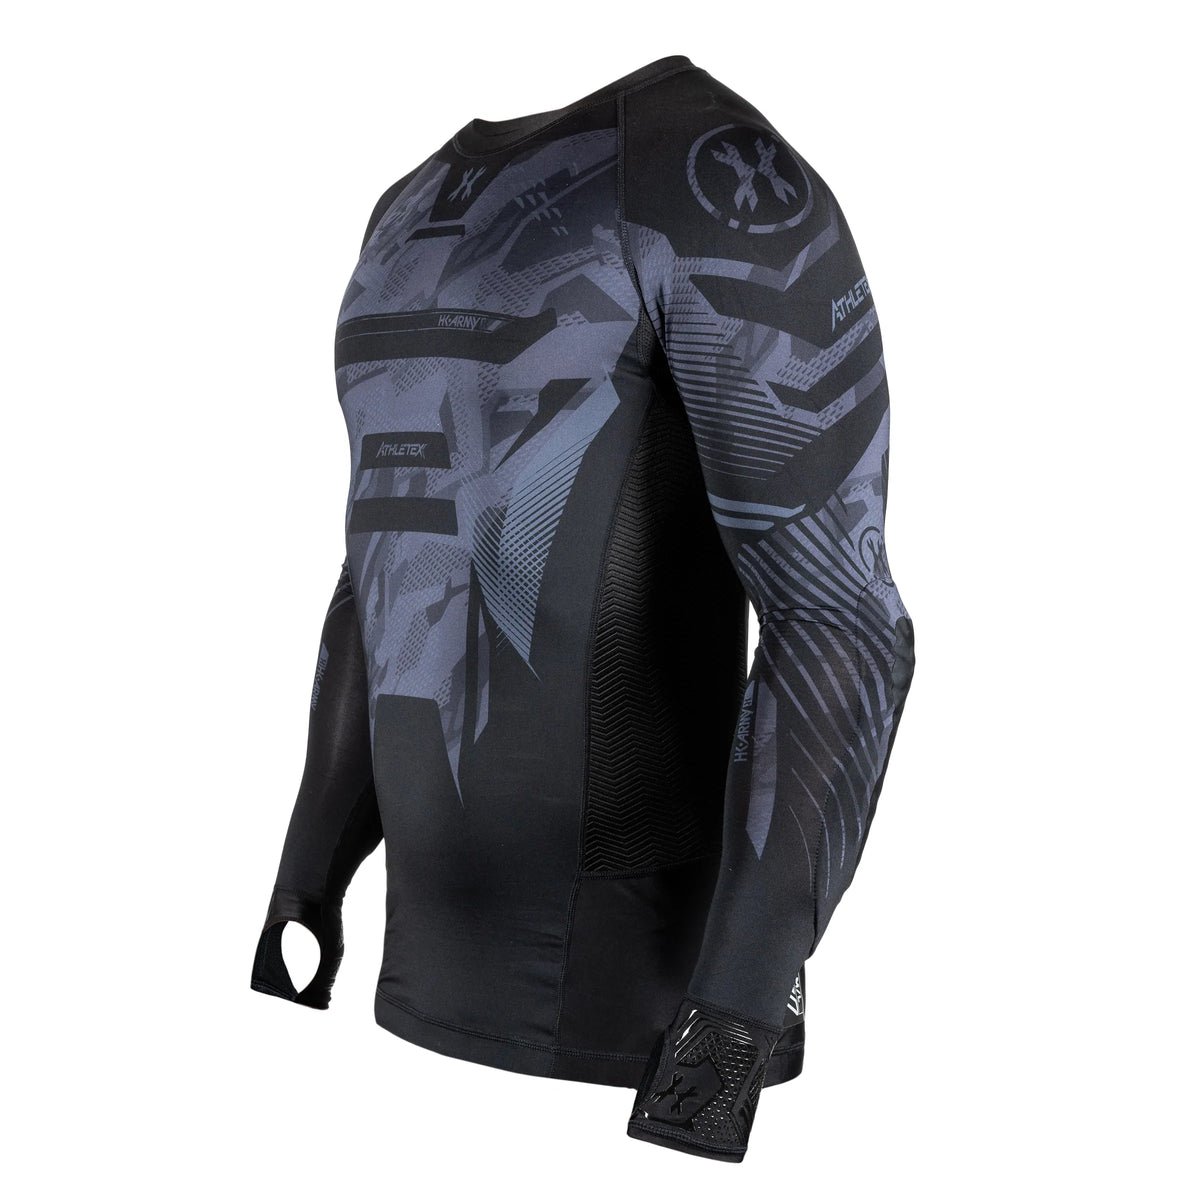 Ctx Armored Compression Shirt - Full Torso Performance Padded Paintball Shirt | Hk Army